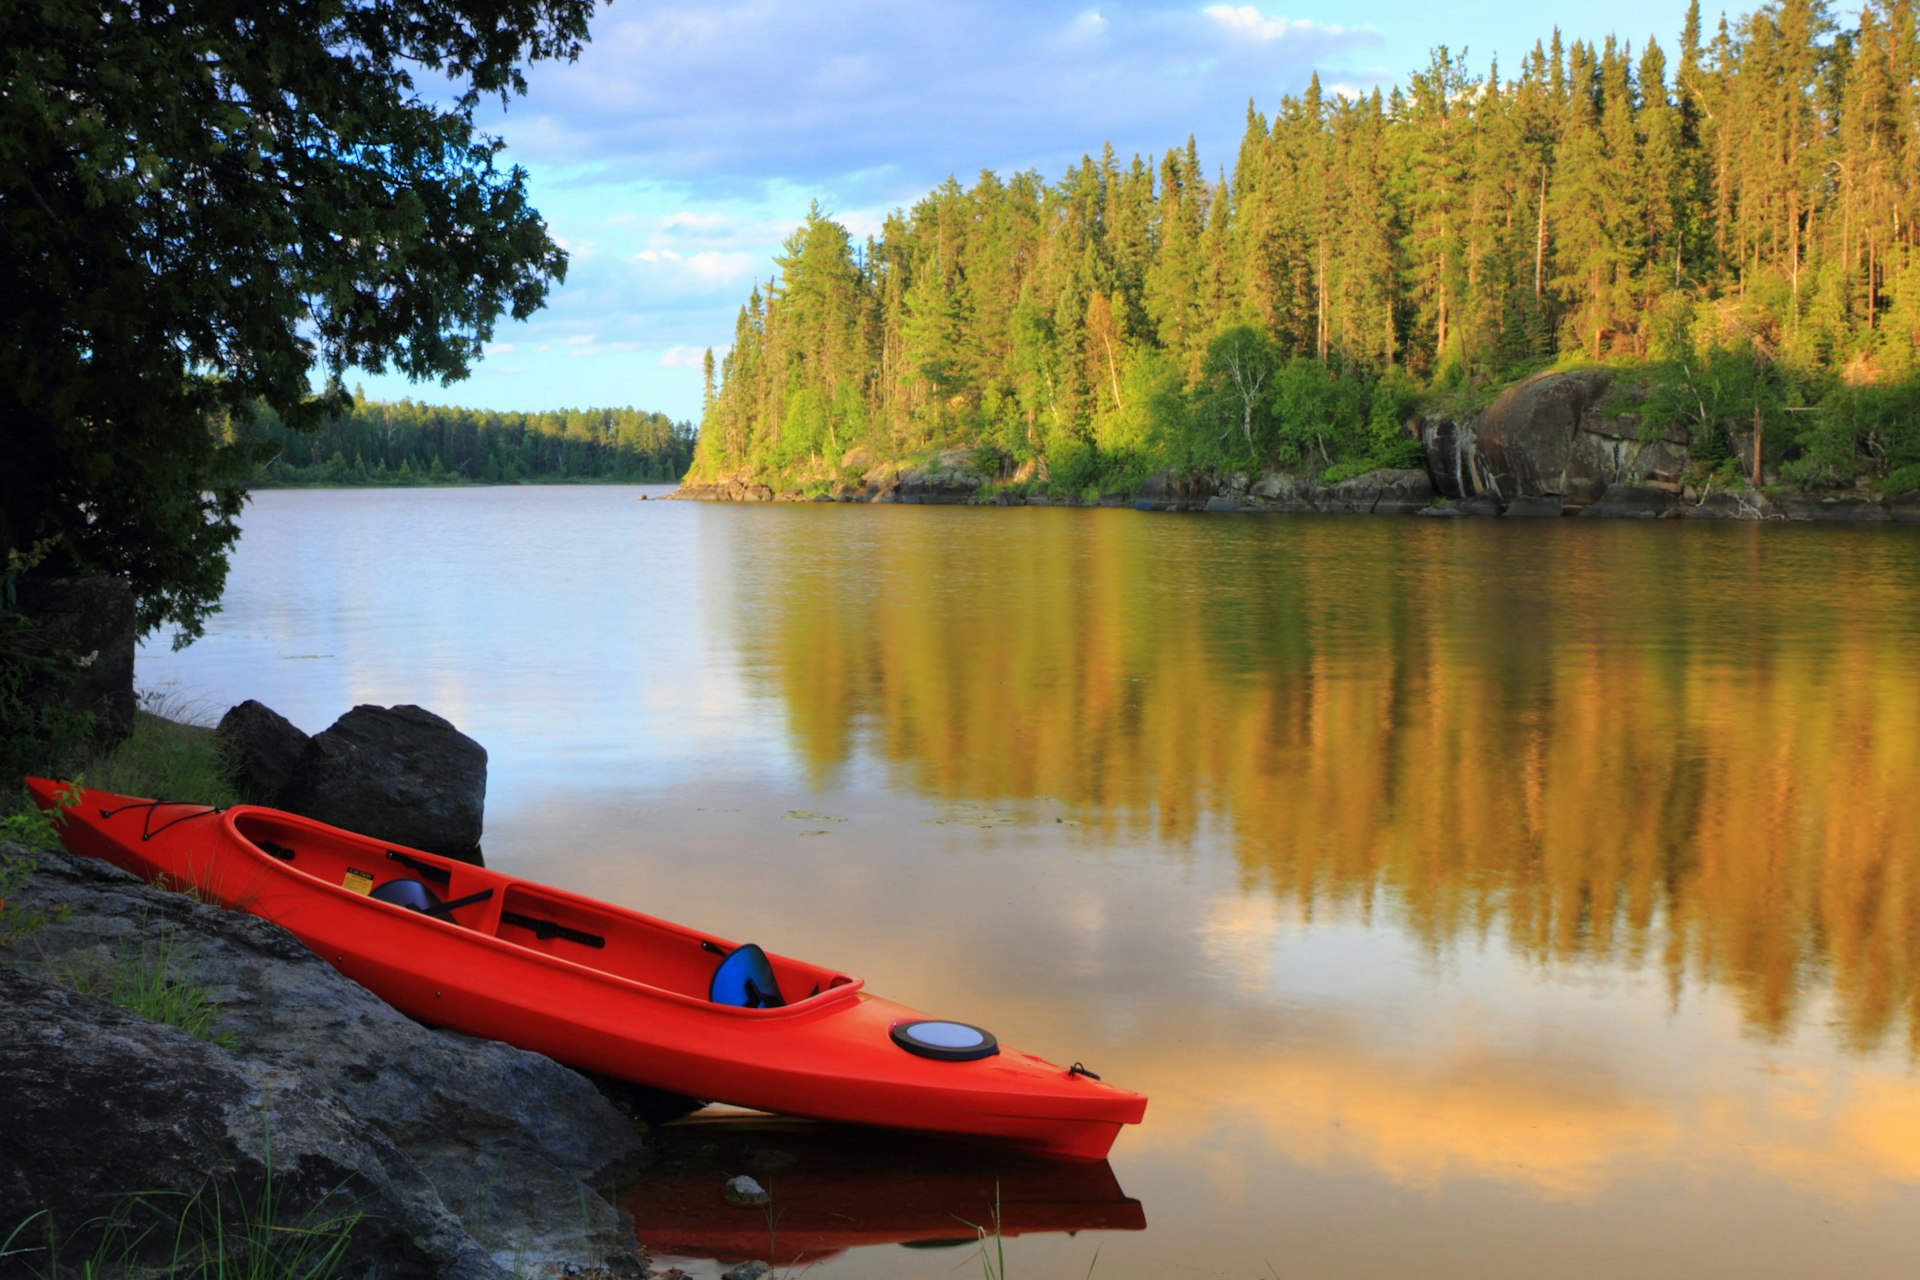 A red and blue canoe at the lake on a sunny day